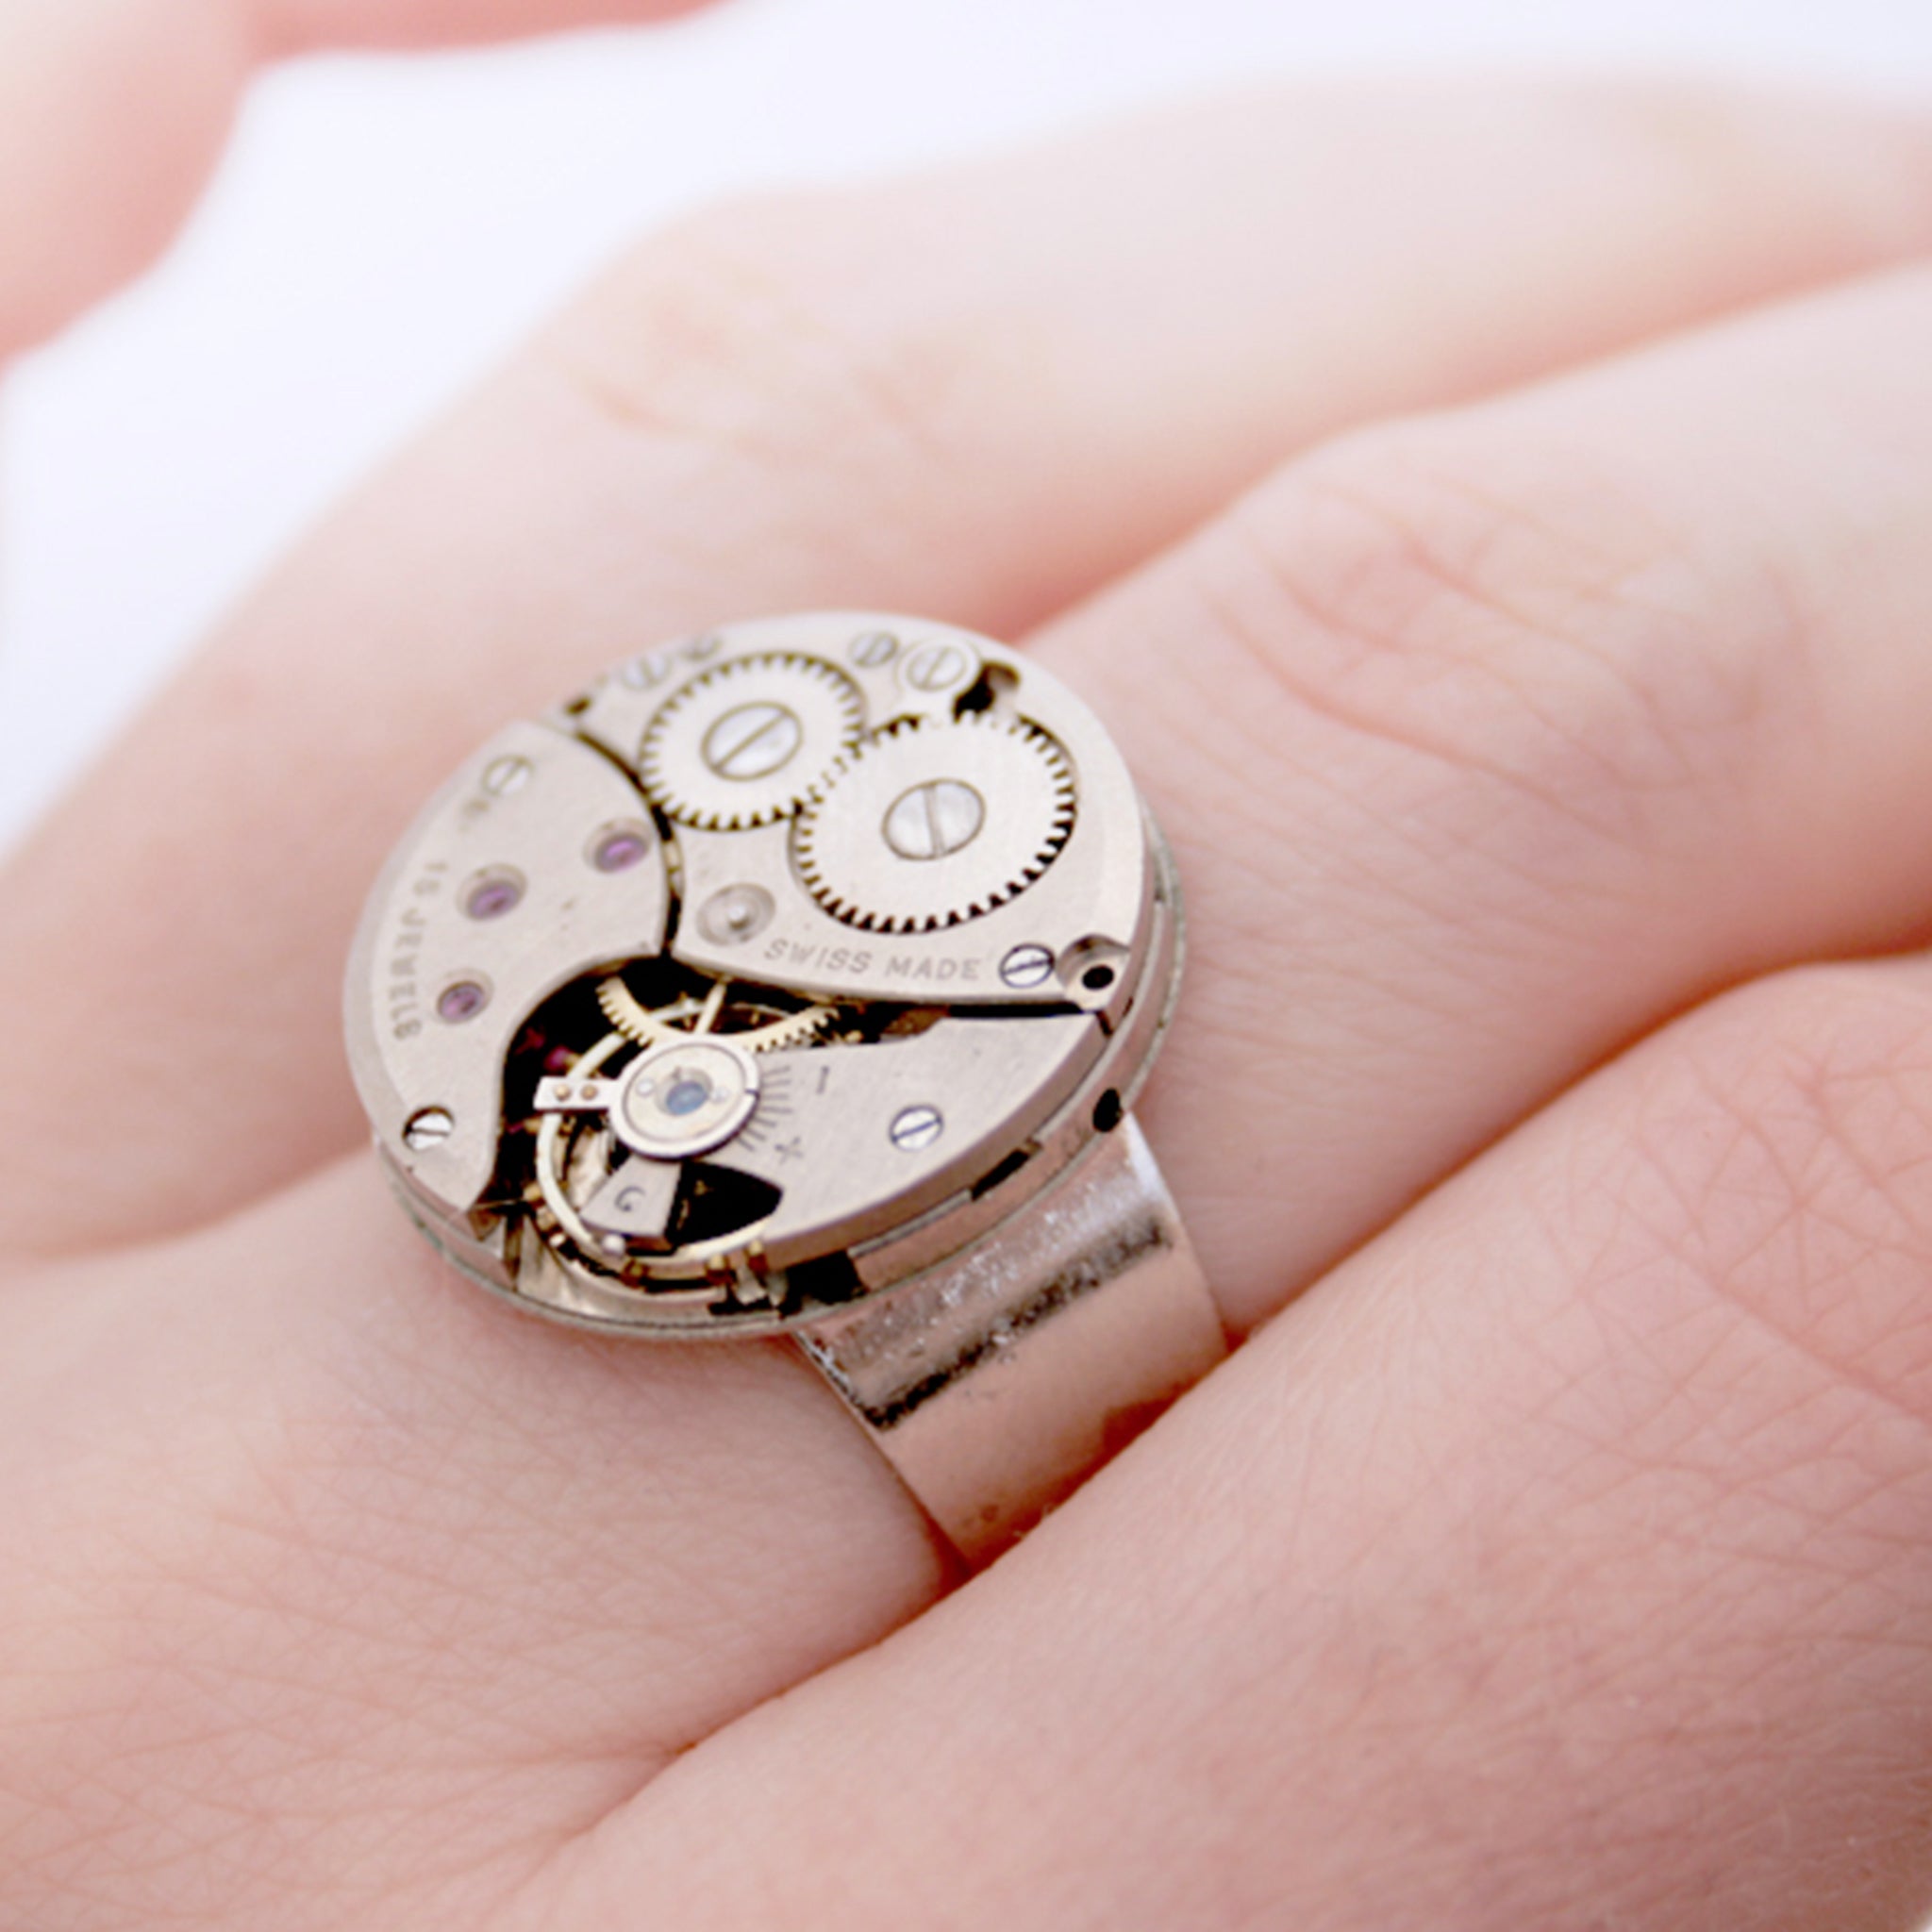 steampunk ring made of a real Swiss watch mechanism on hand